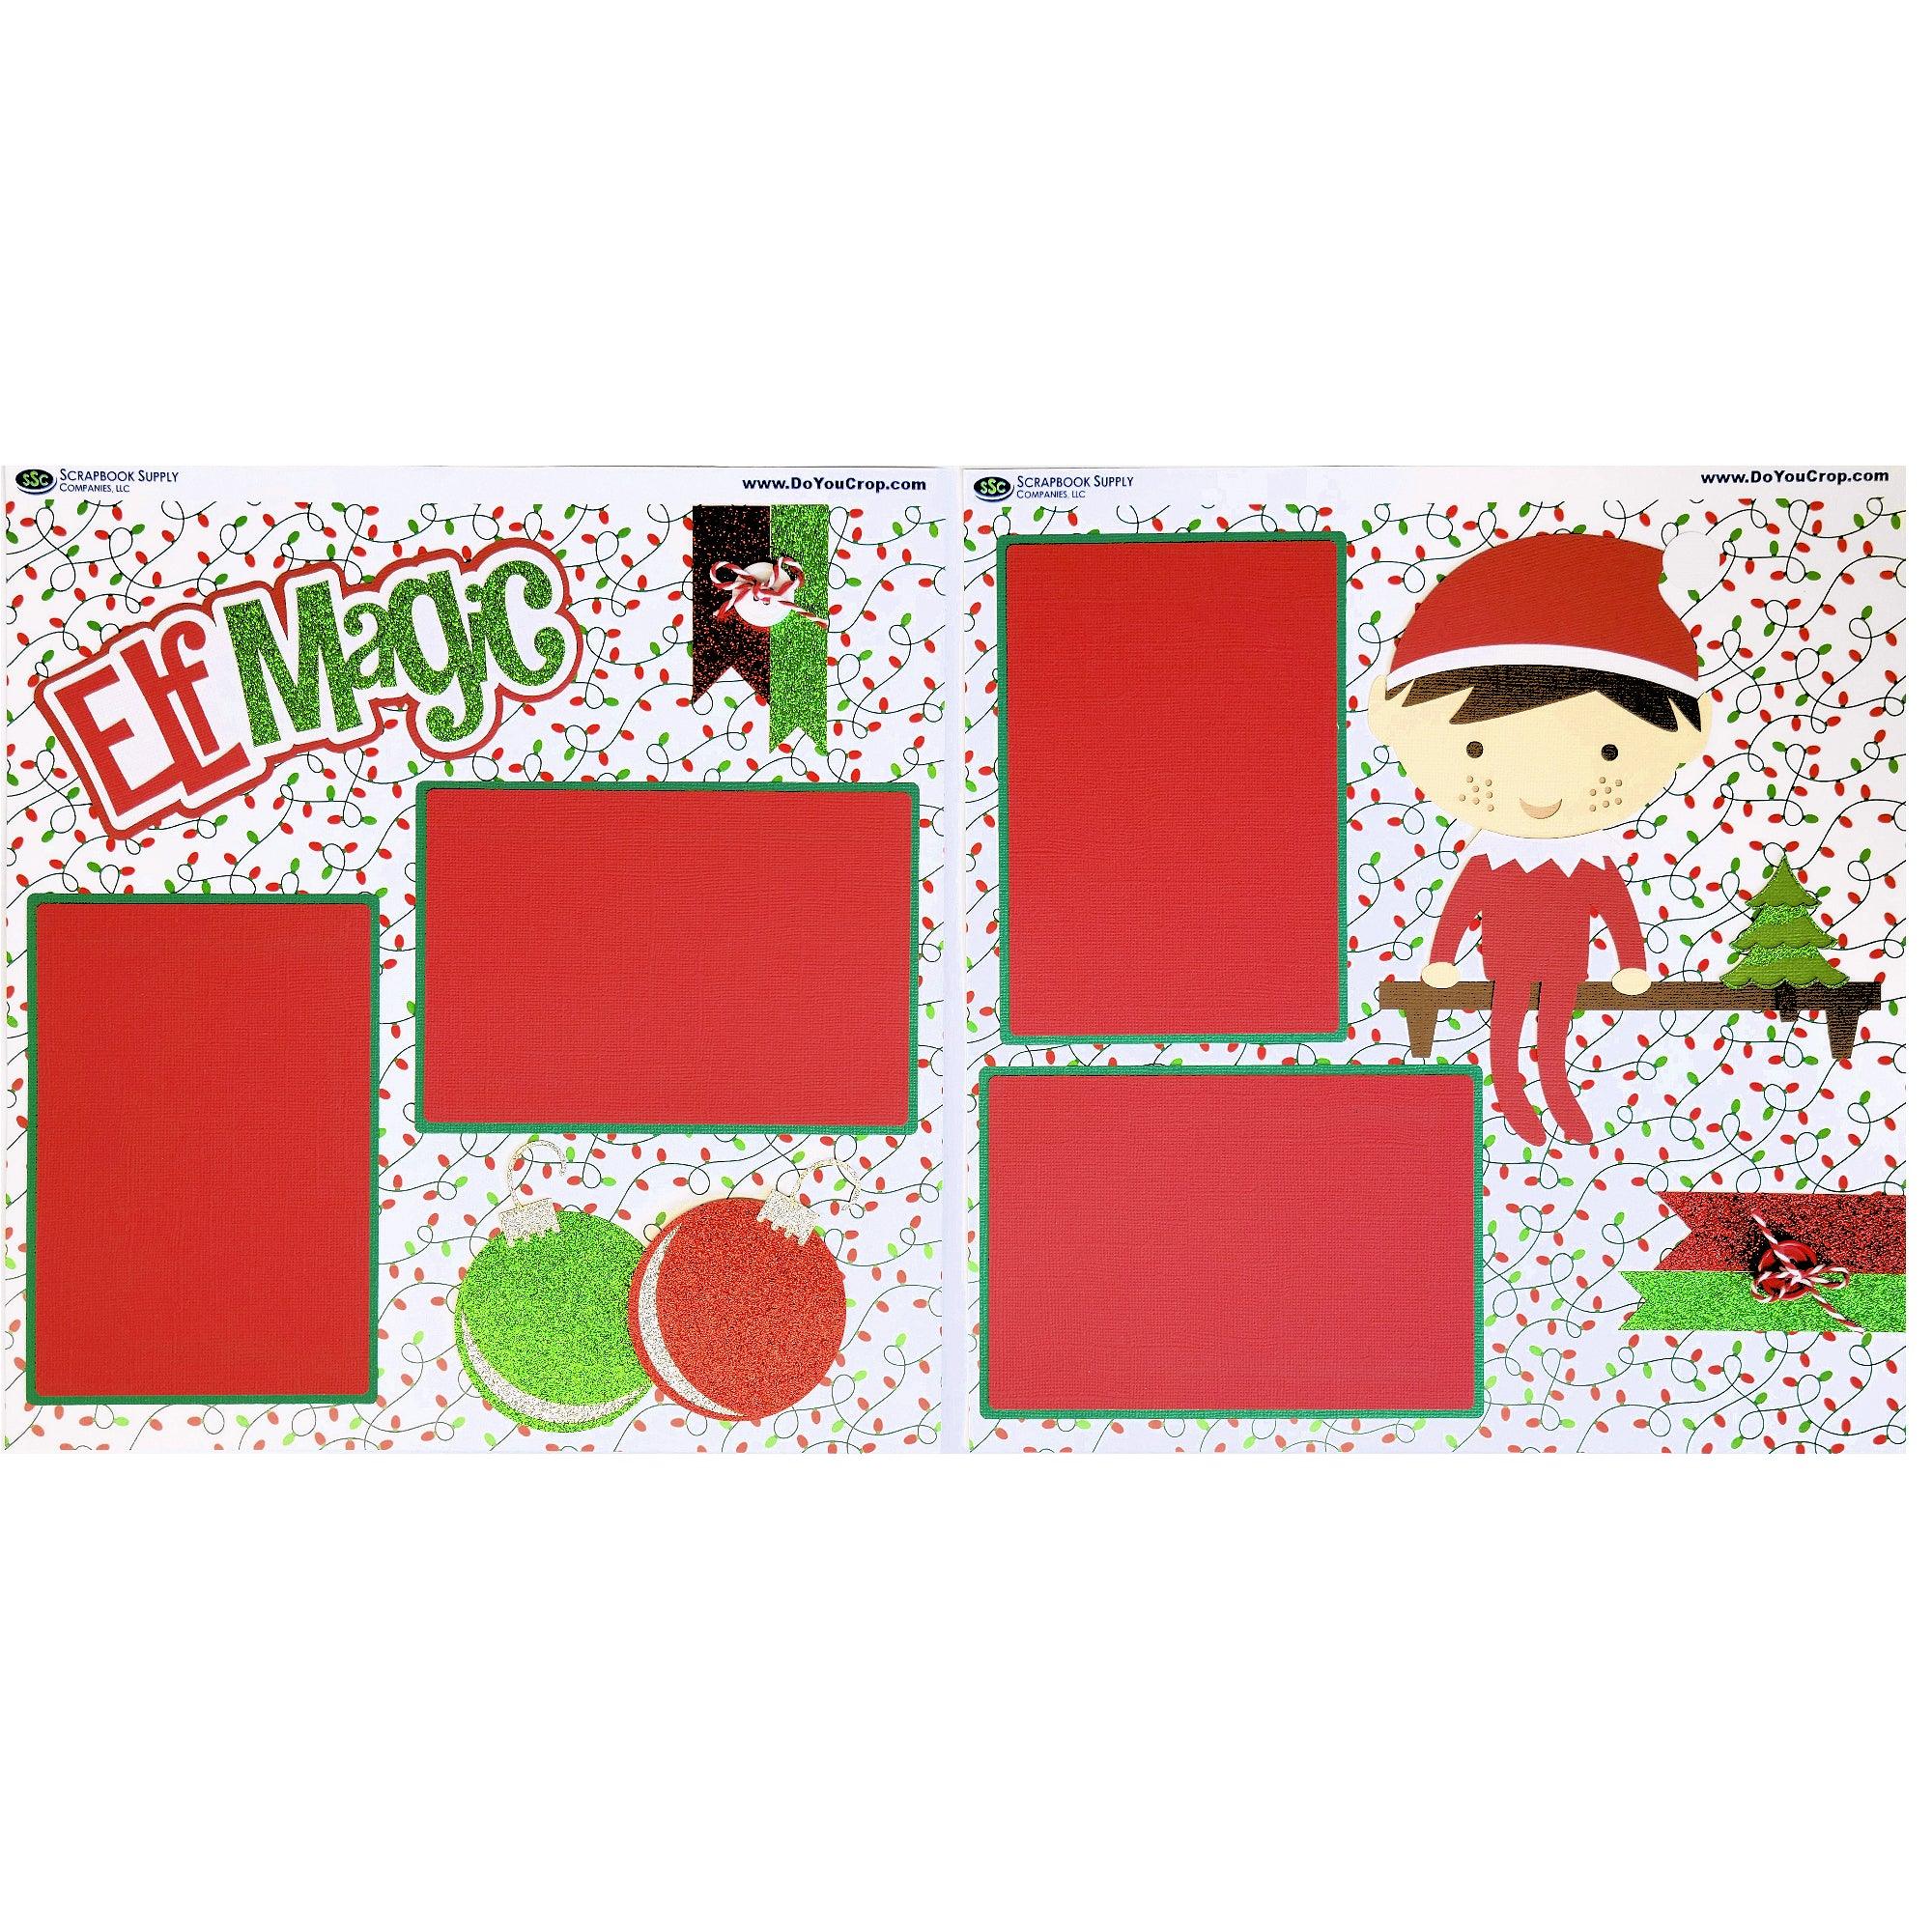 Elf Magic On The Shelf (2) - 12 x 12 Pages, Fully-Assembled & Hand-Crafted 3D Scrapbook Premade by SSC Designs